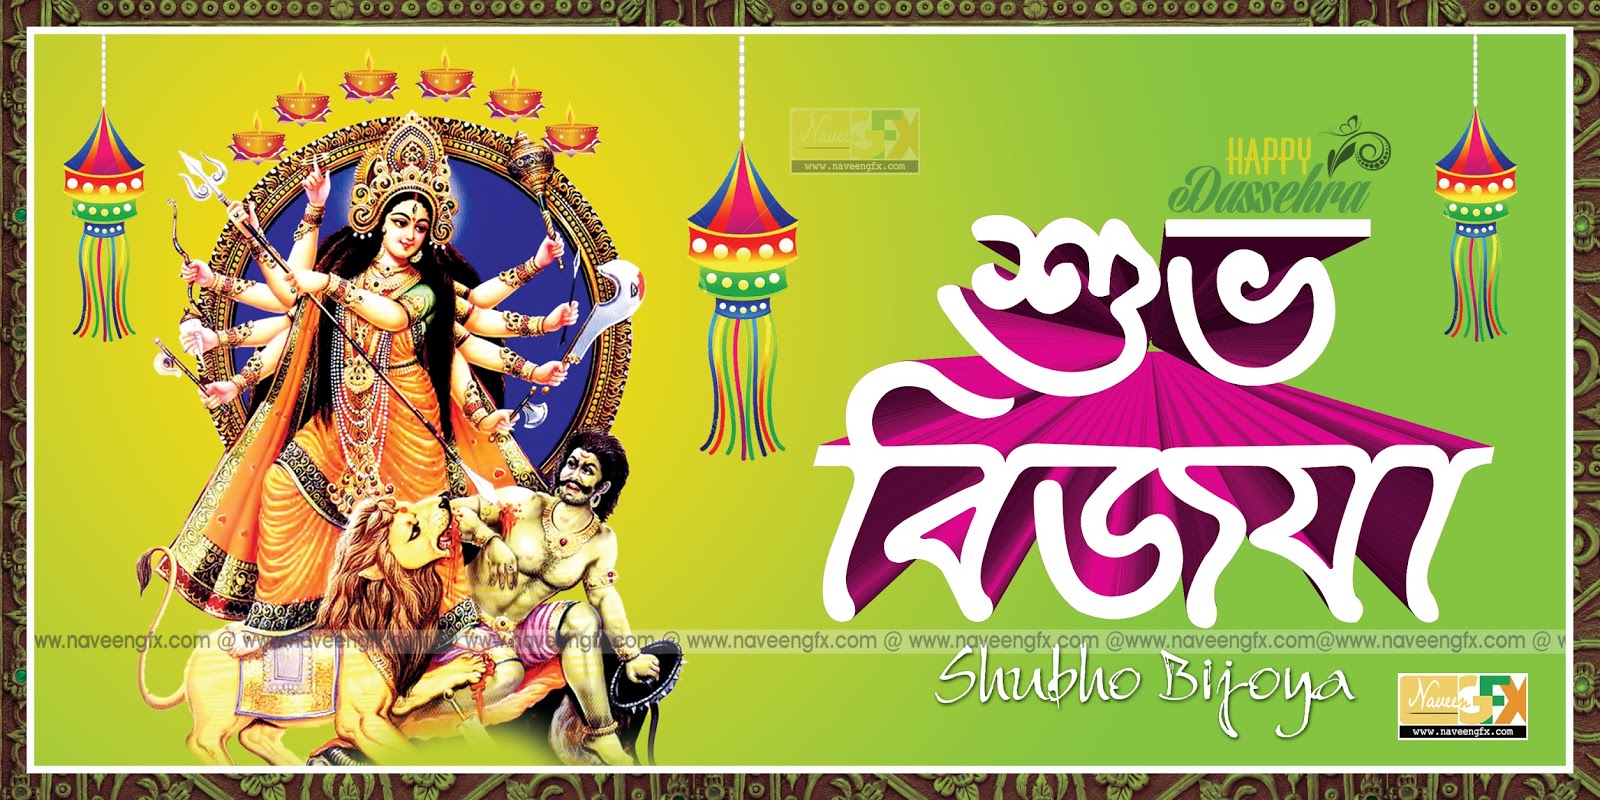 happy dussehra bengali greetings and quotes | naveengfx